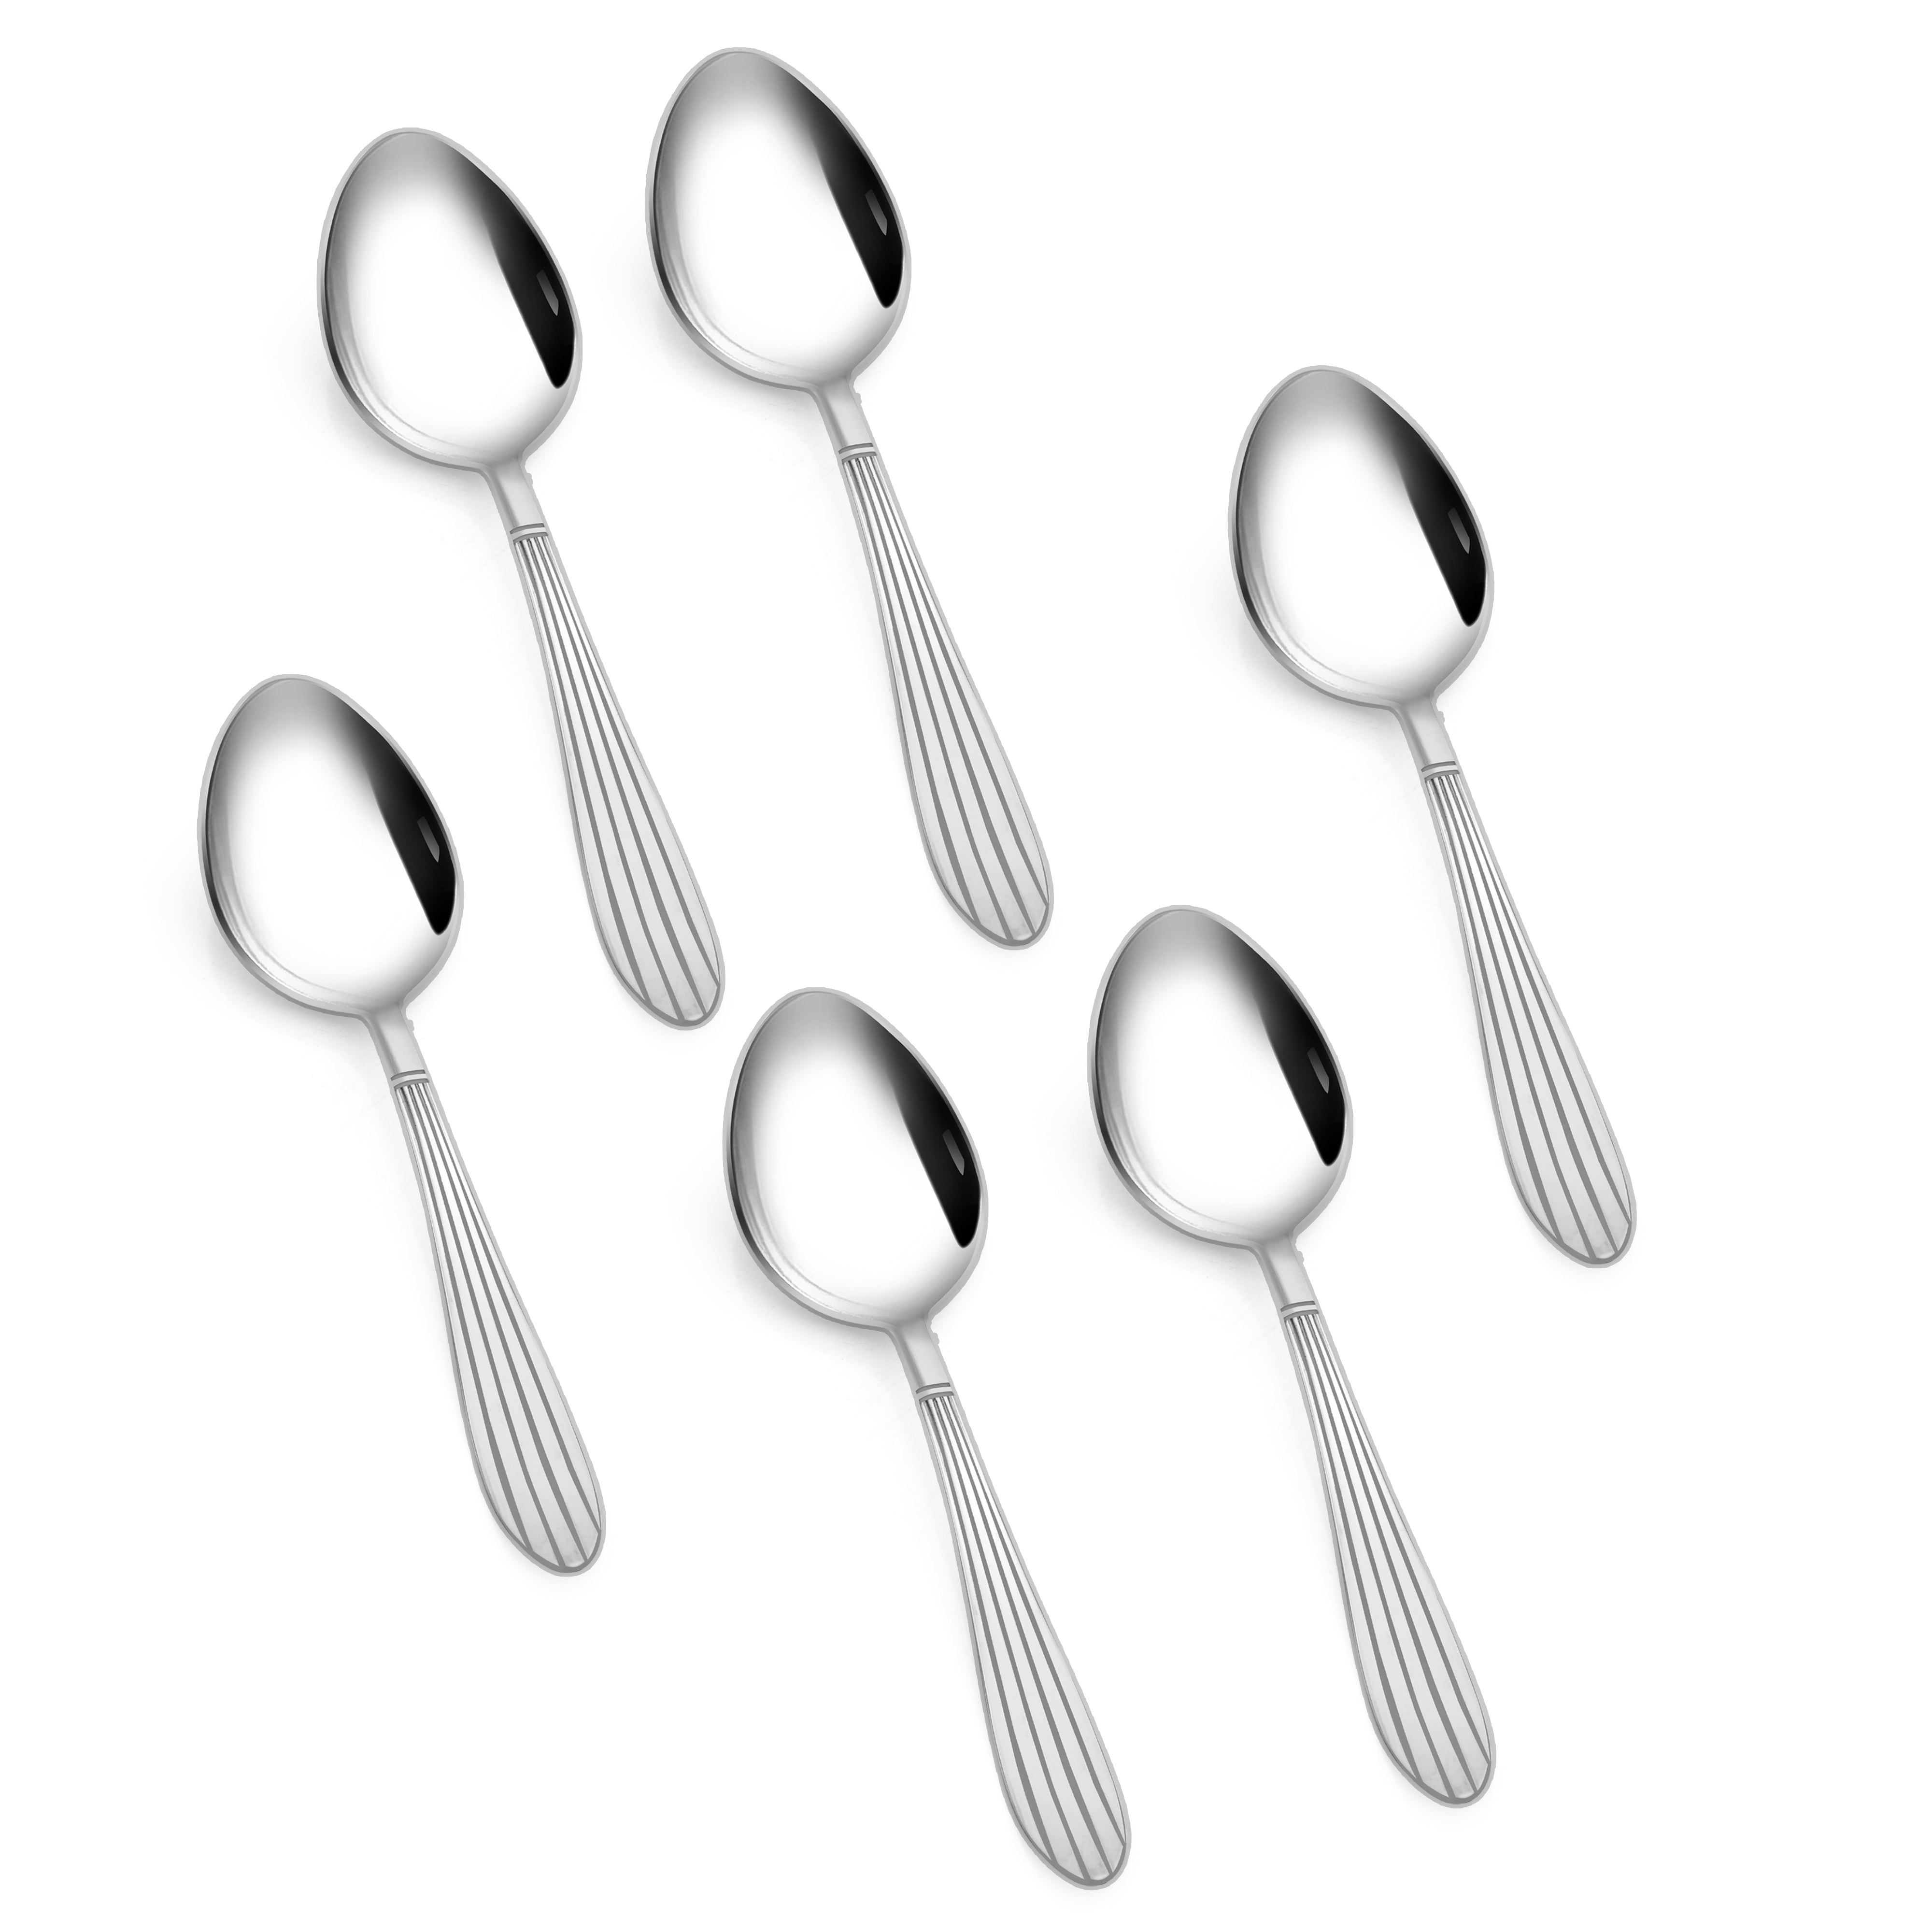 Arias by Lara Dutta Sysco Cutlery Set of 24 With Stand (Silver)